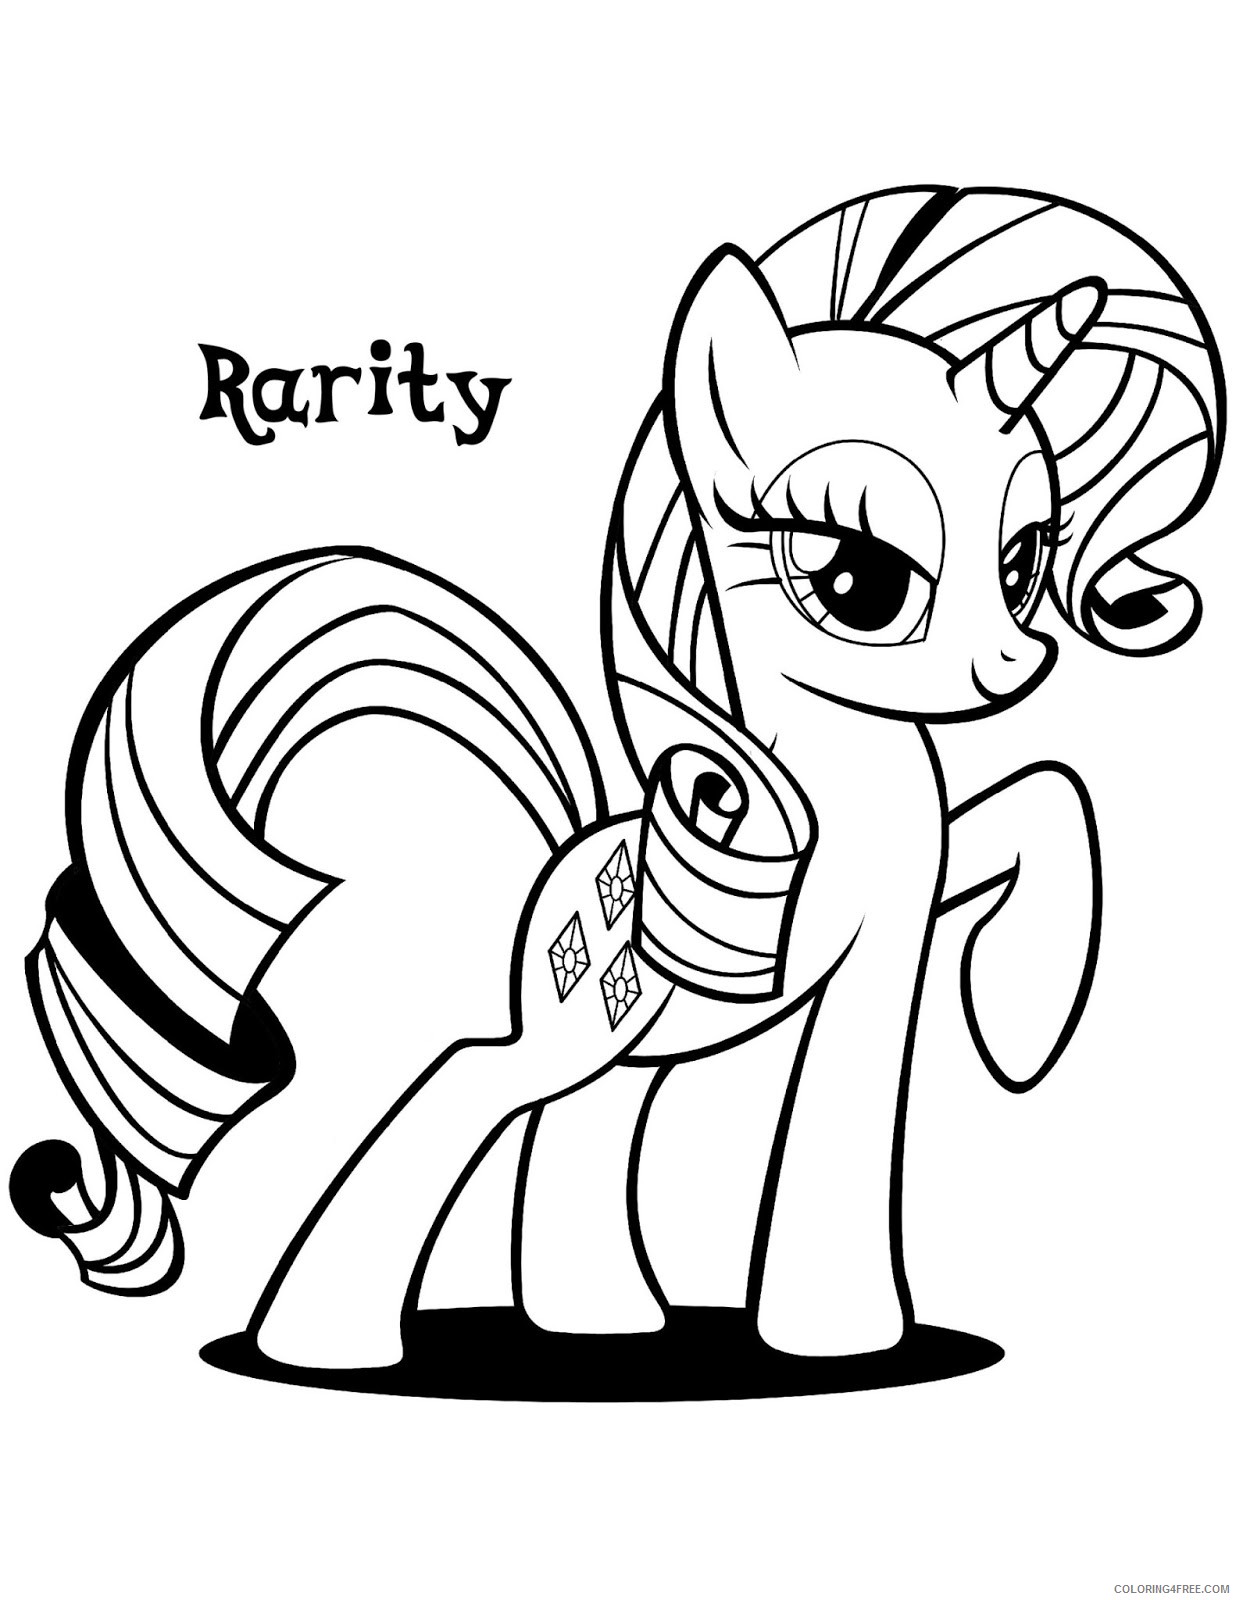 My Little Pony Coloring Pages Cartoons My Little Pony Rarity Printable 2020 4580 Coloring4free